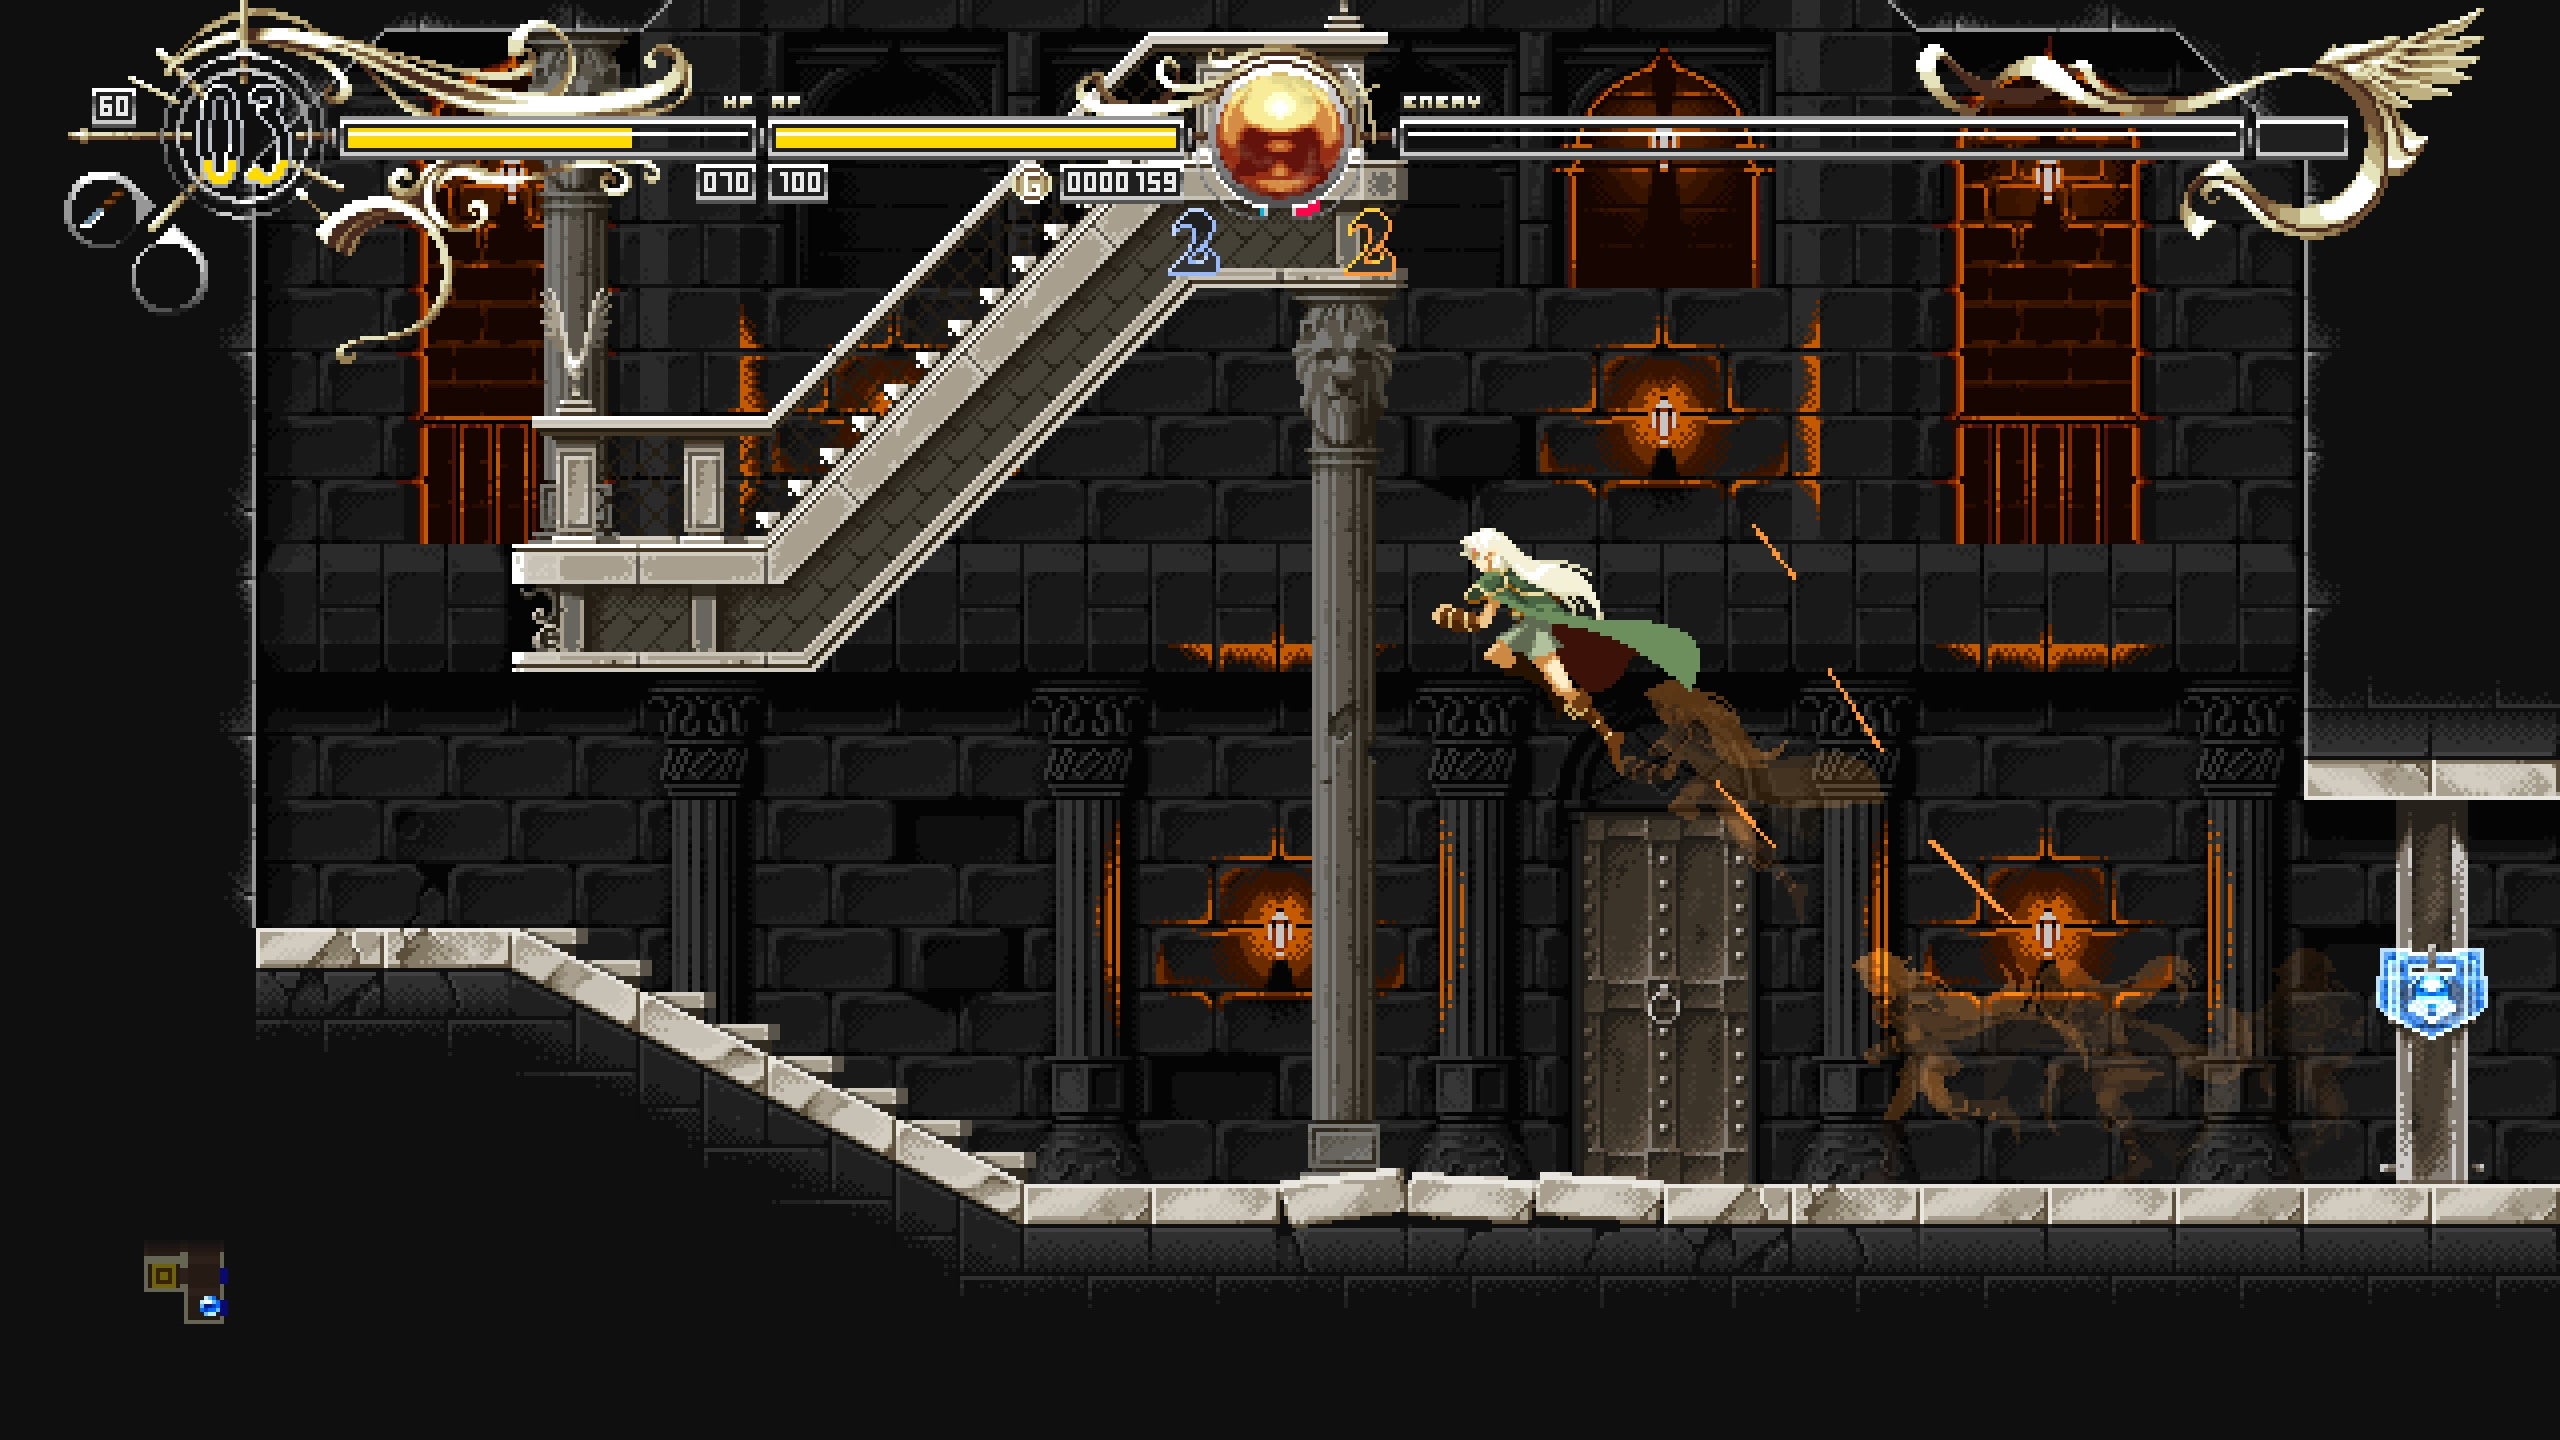 A screenshot of Deedlit jumping through a dungeon environment in Deedlit in Wonder Labyrinth